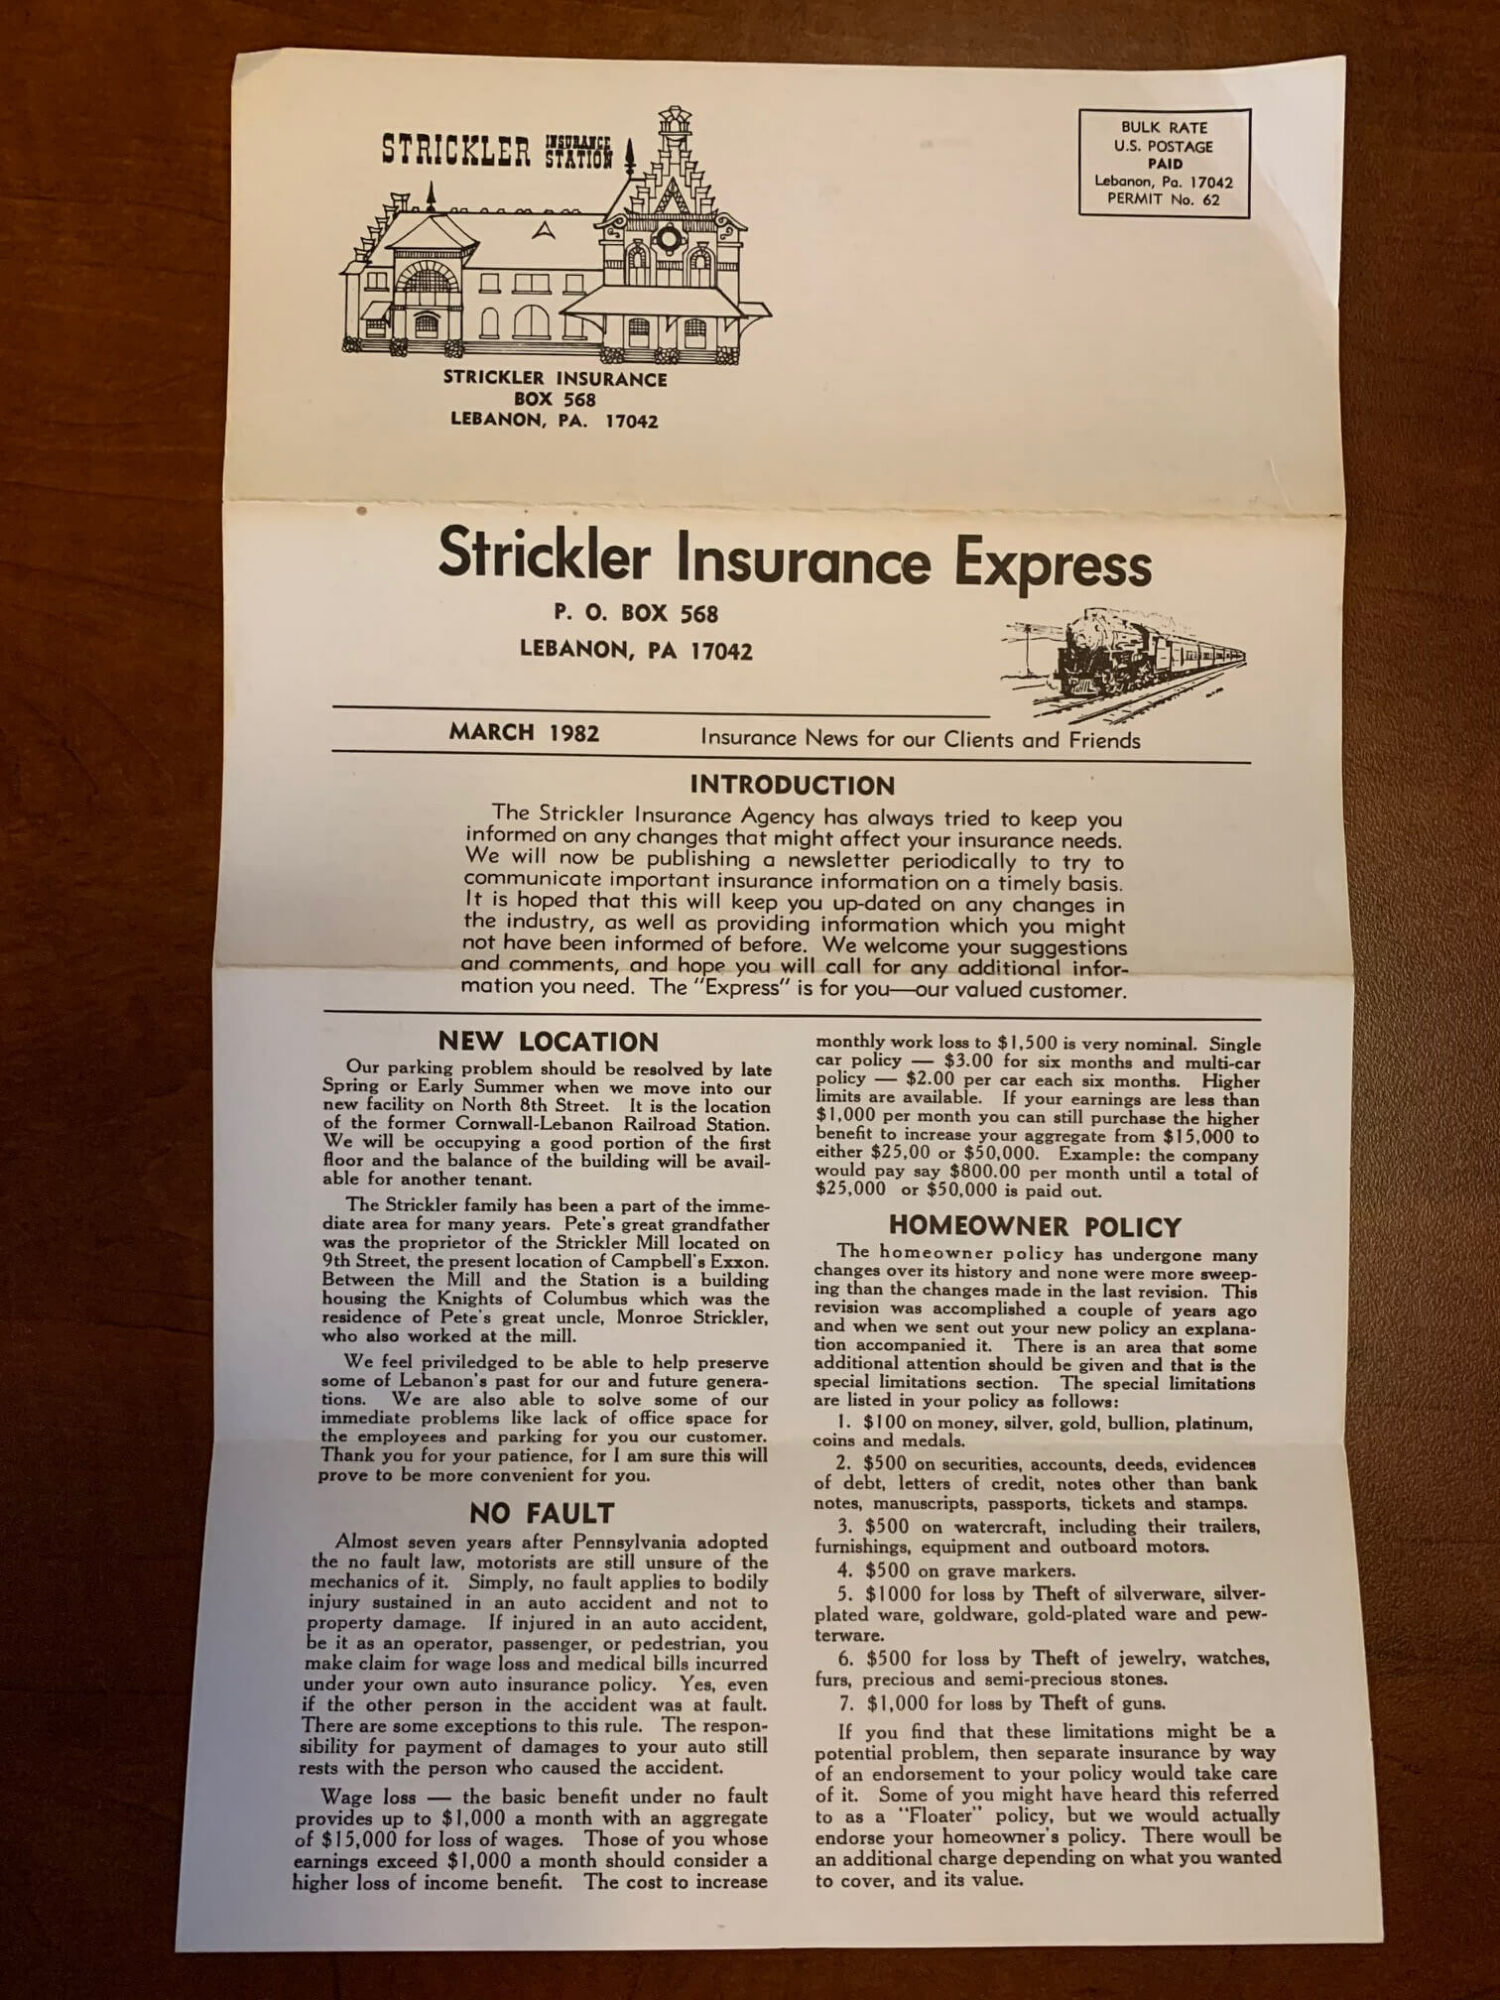 Strickler Express Insurance News From 1982 Front Page.